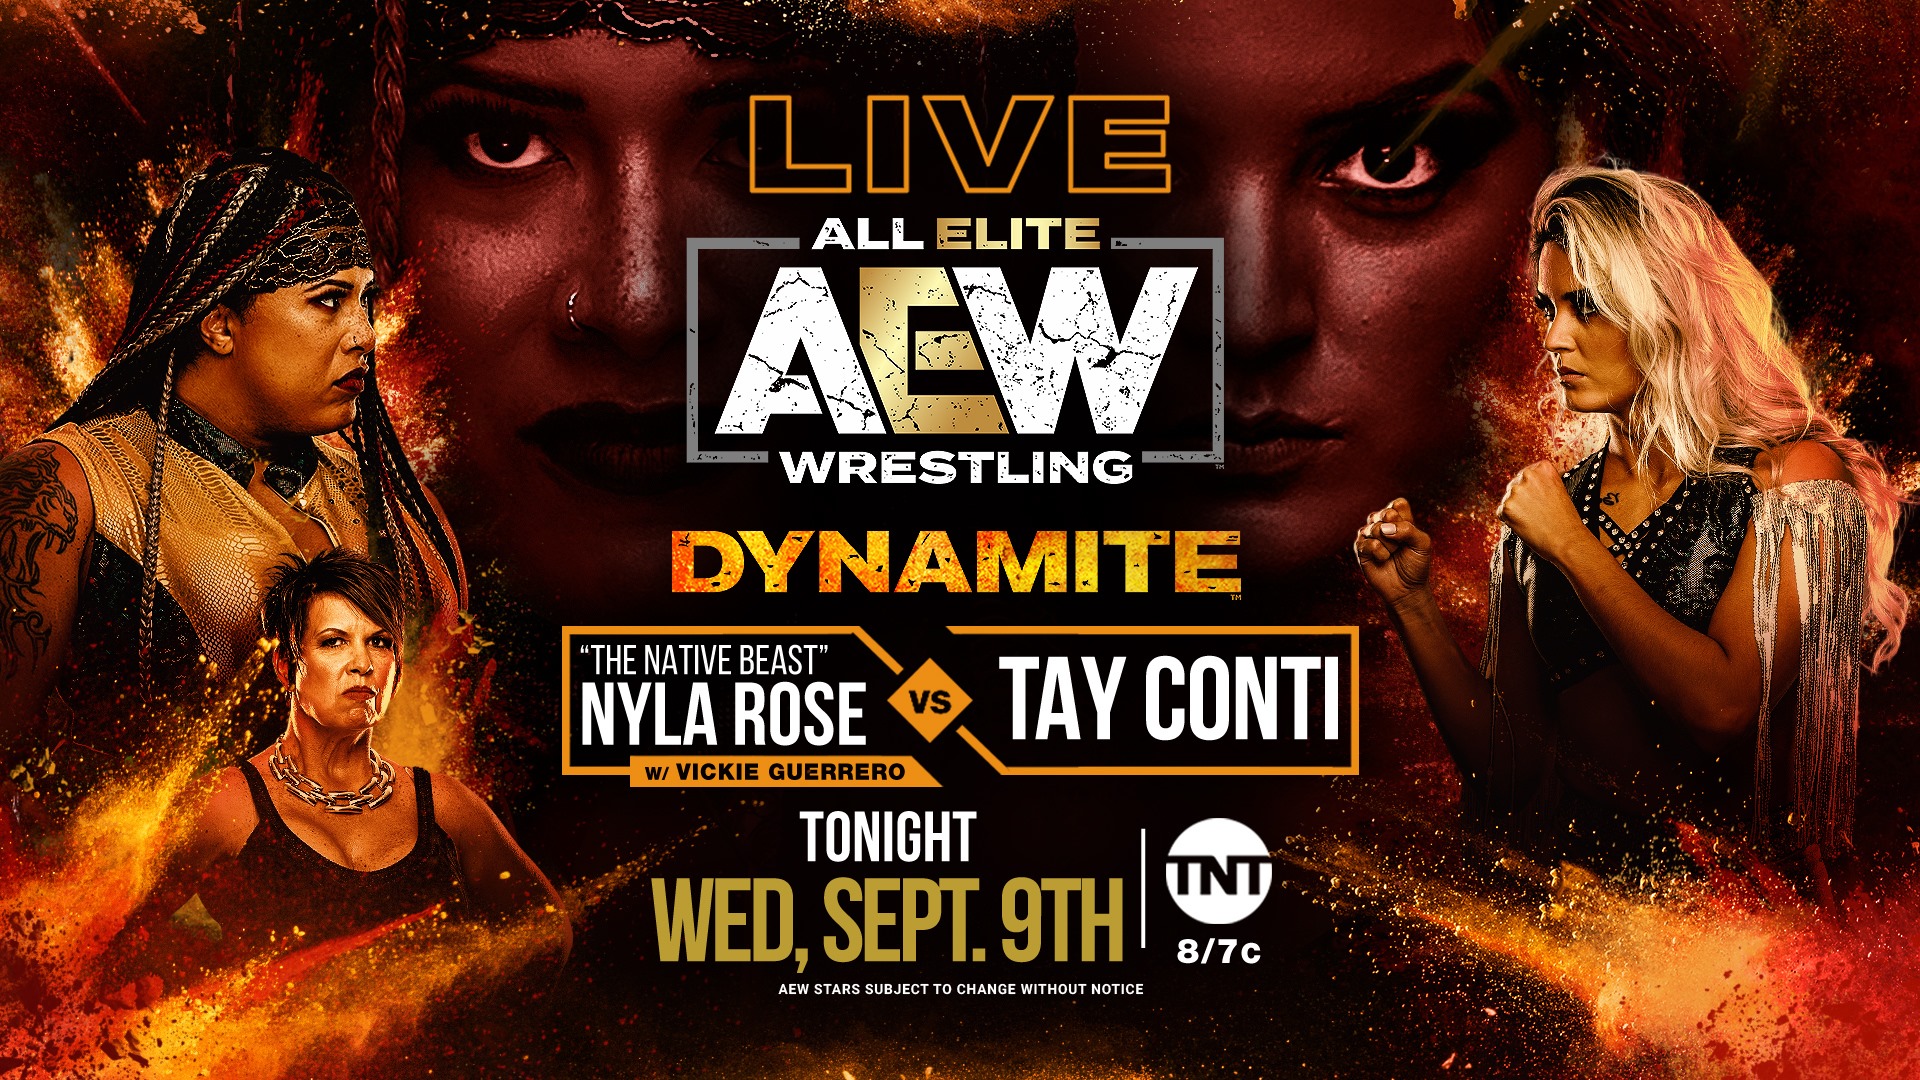 Nyla Rose (With Vickie Guerrero) VS Tay Conti & Ricky Starks as Darby A...